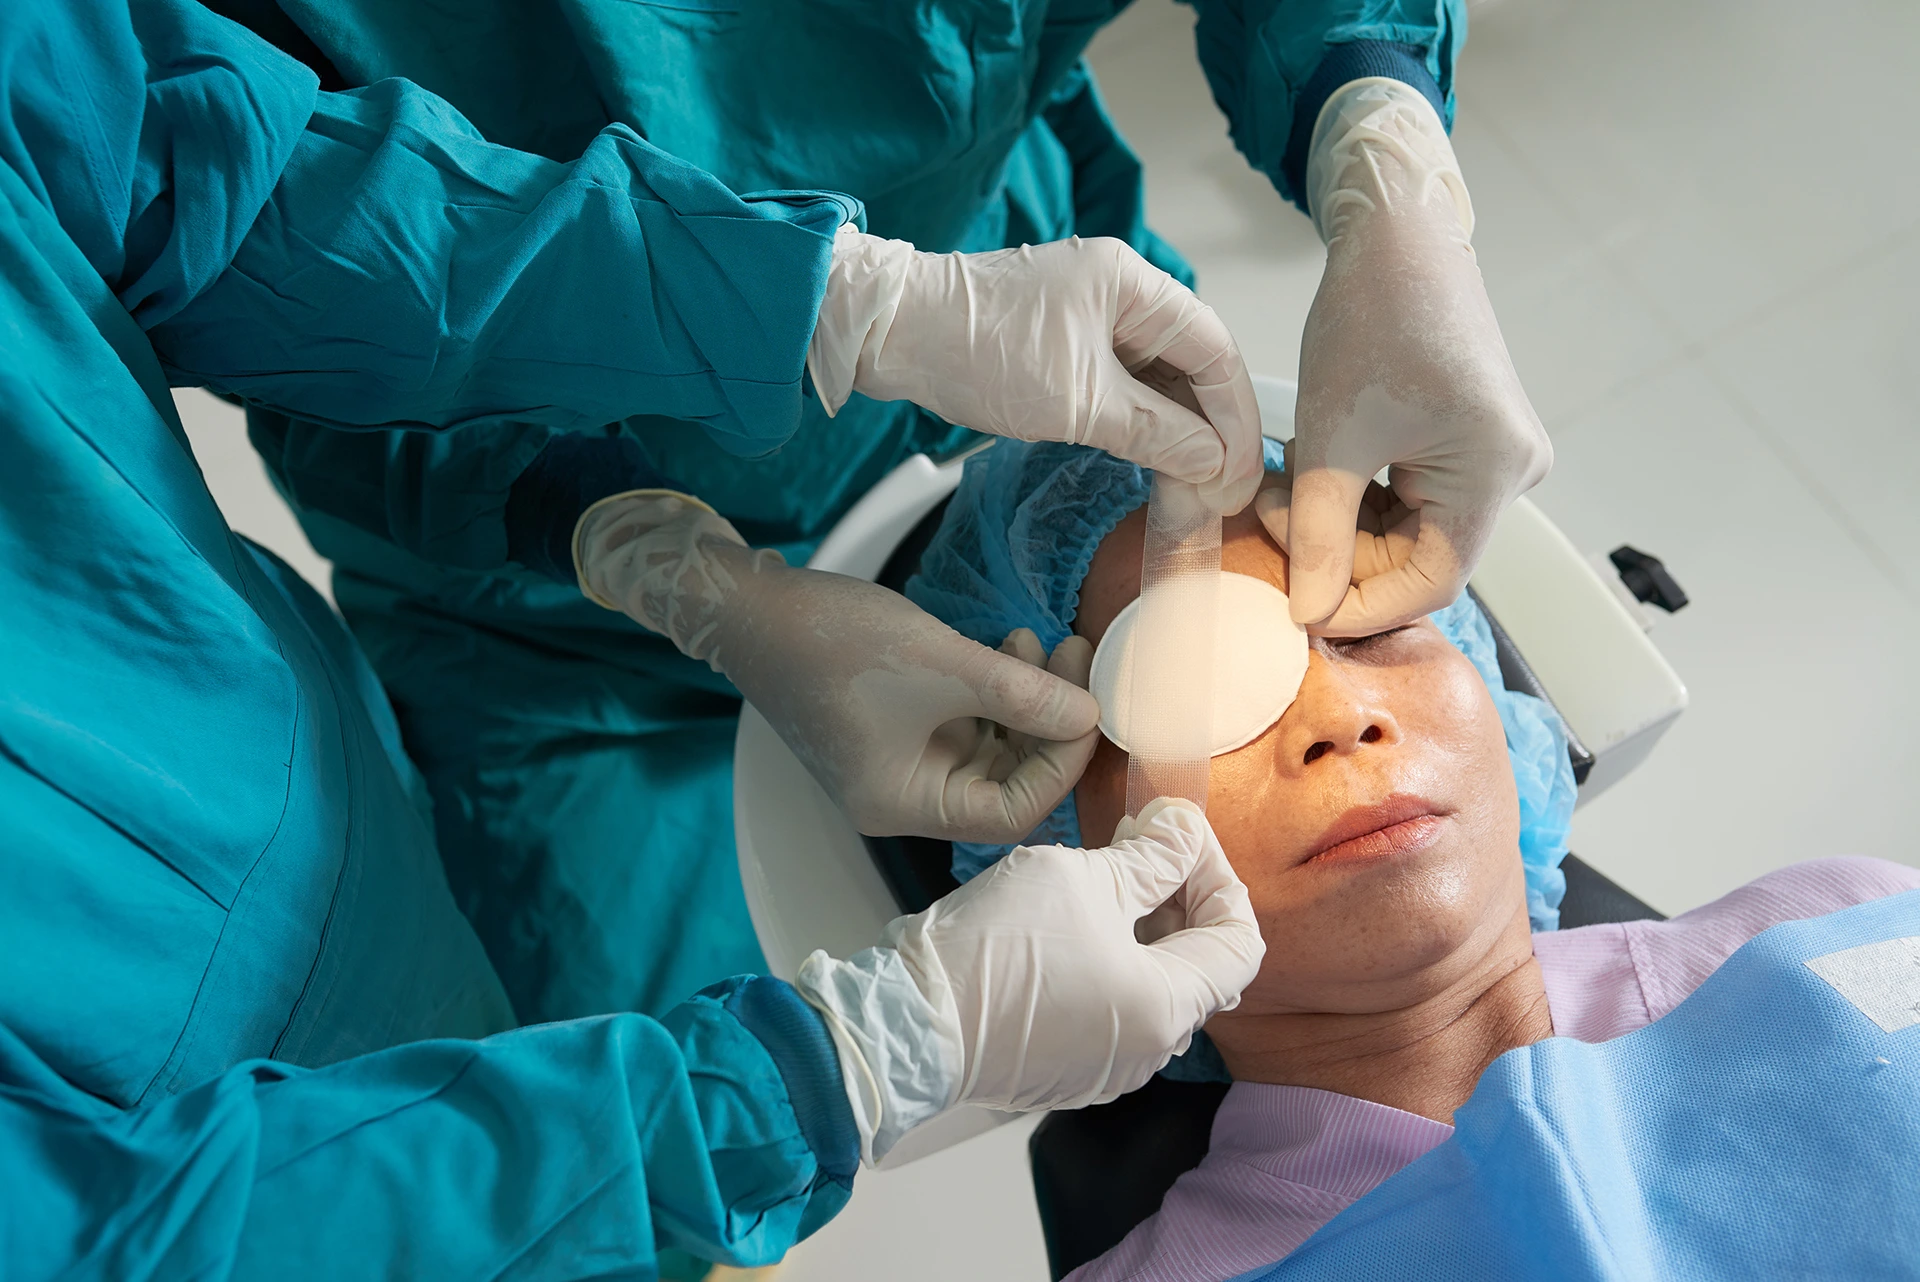 A woman is having surgery on her eye.